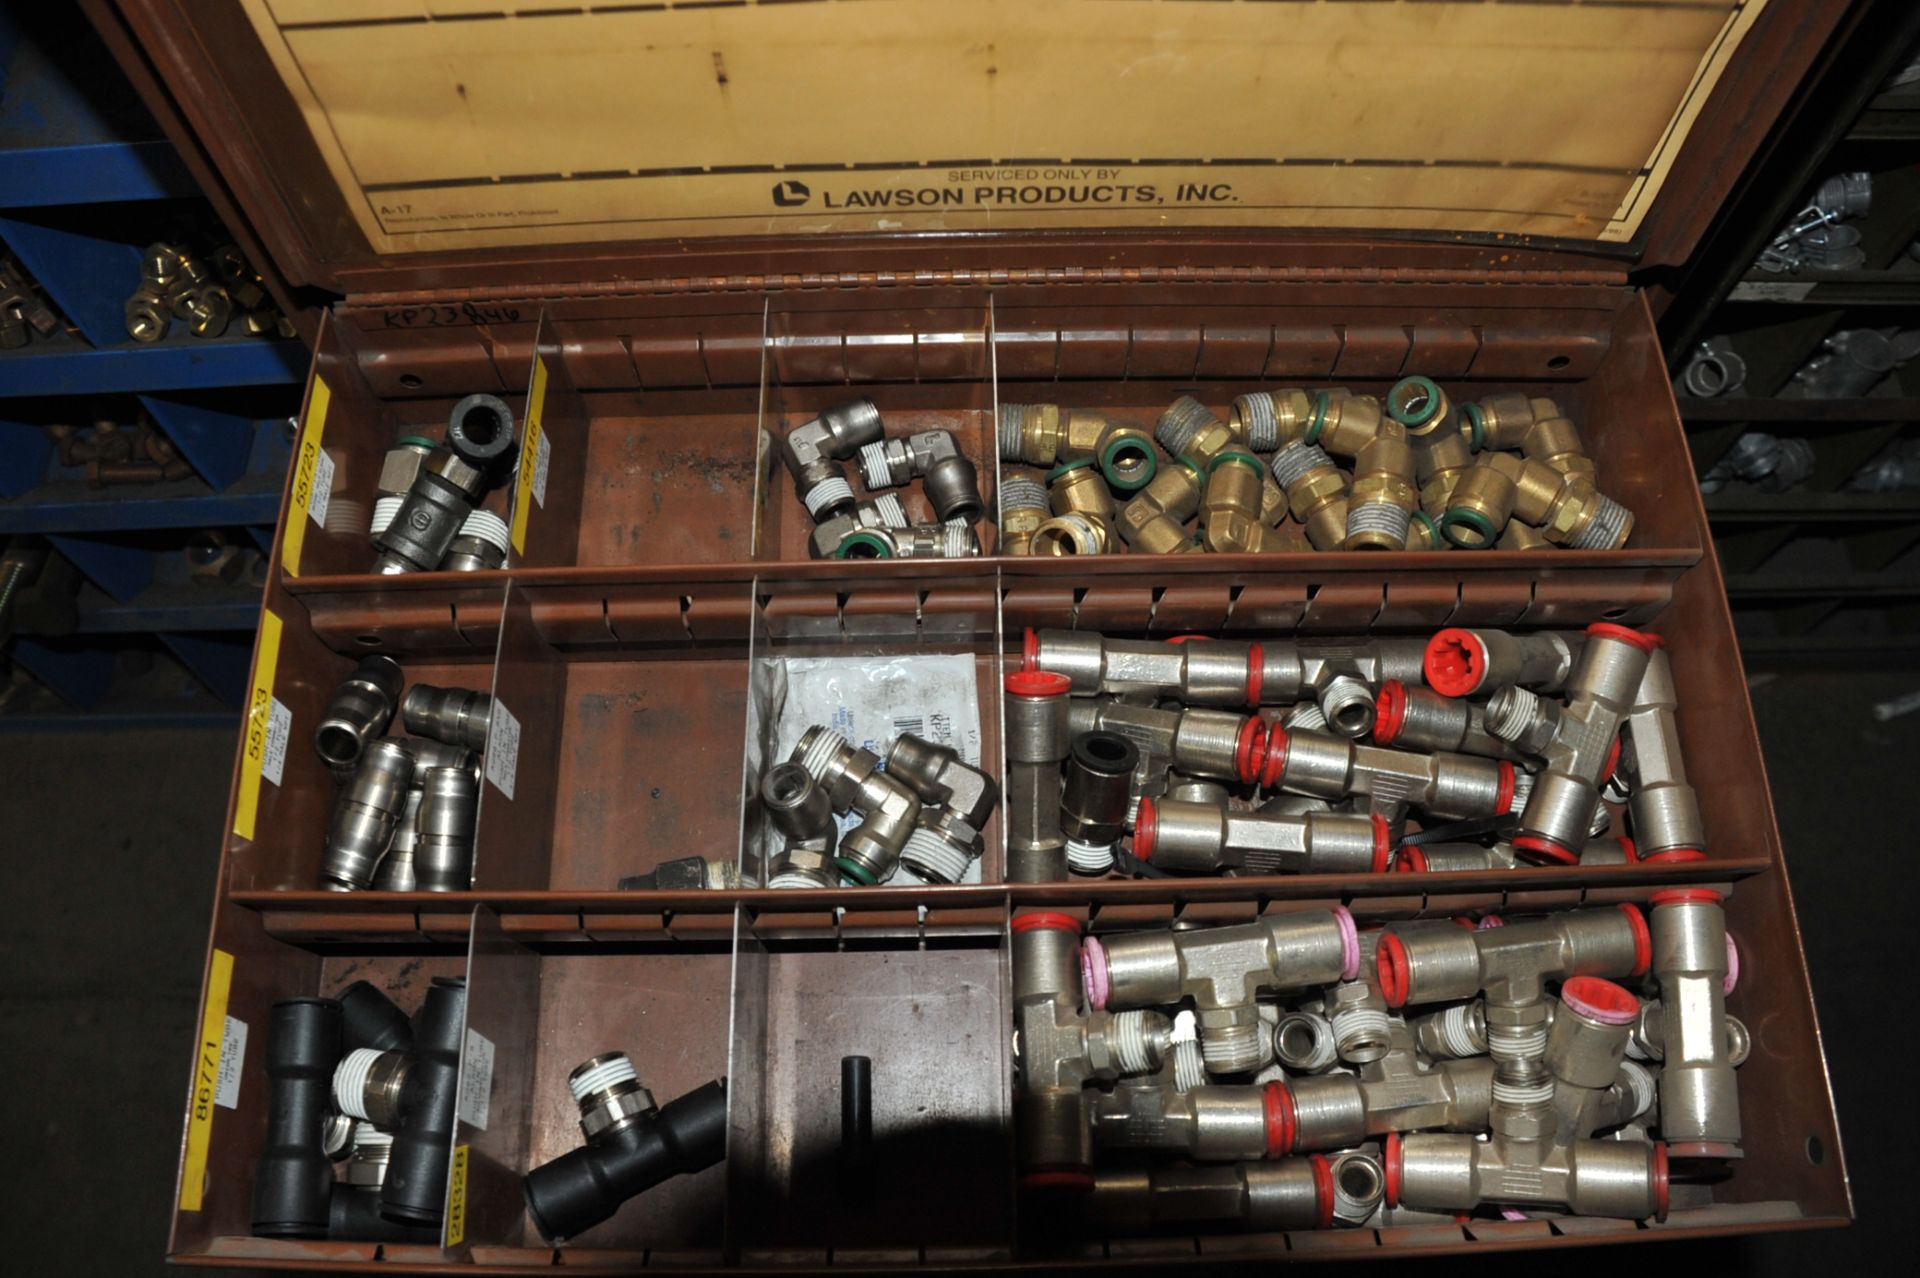 Lot of Pigeon Hole Cabinet; c/w Electrical Parts - Image 5 of 7